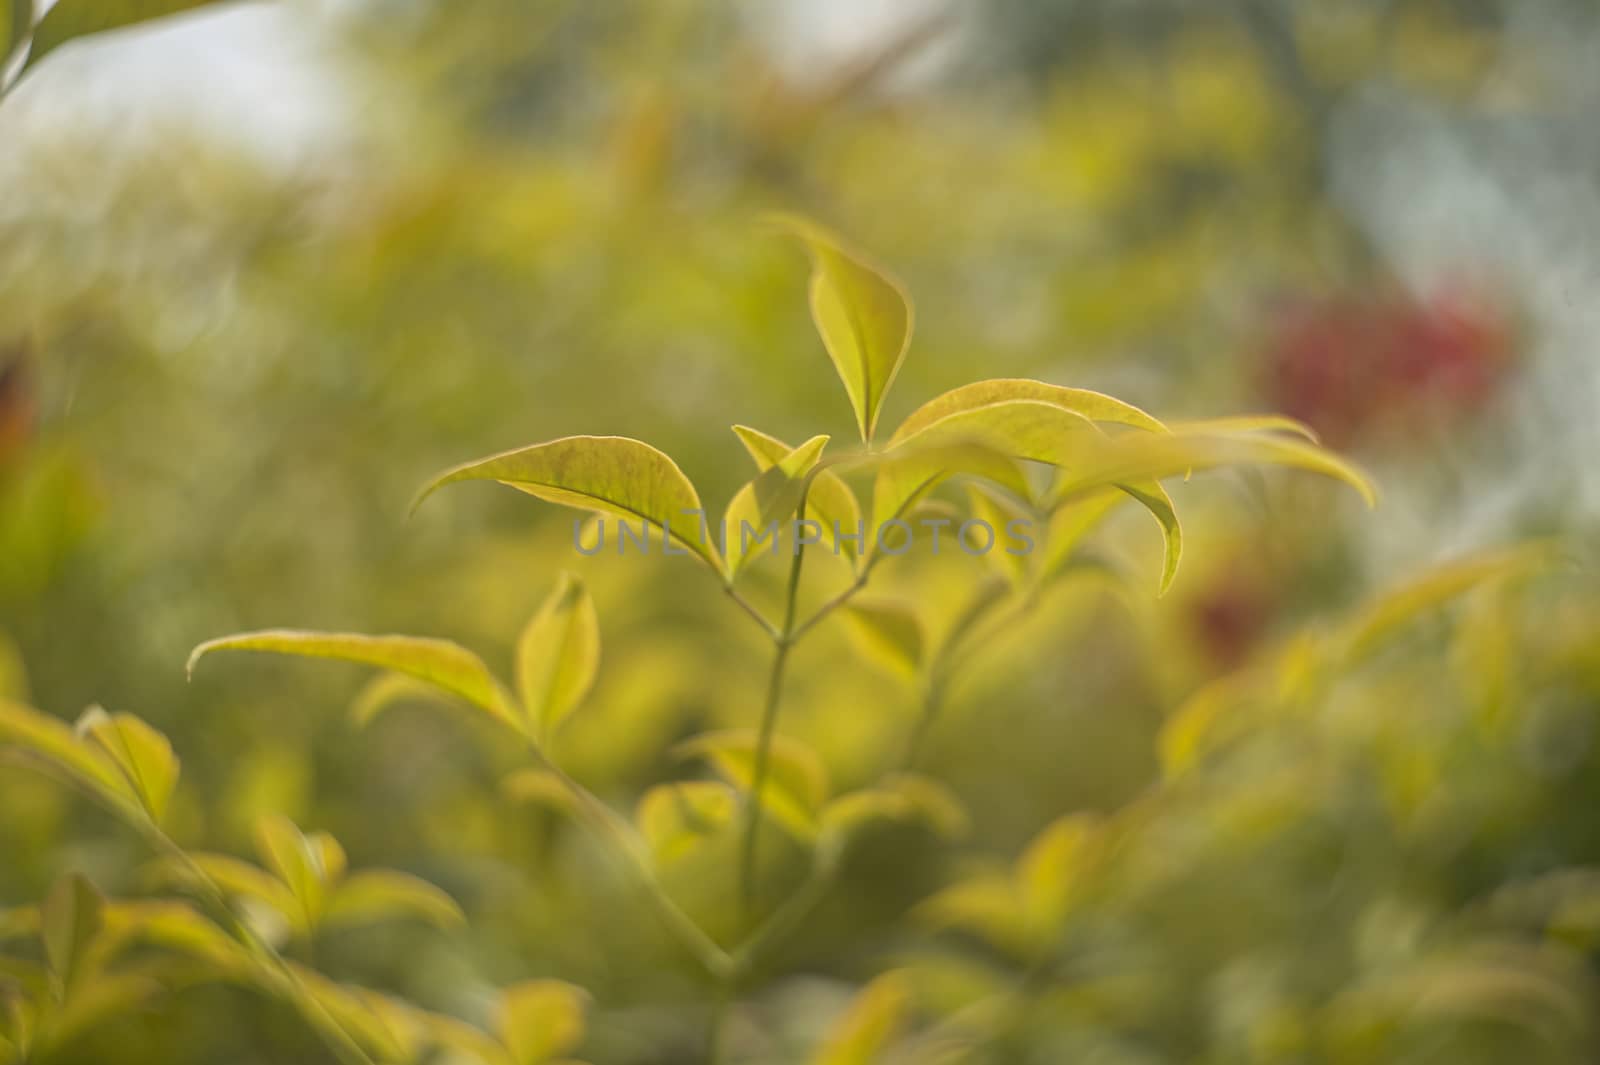 Blurred leaves by pippocarlot